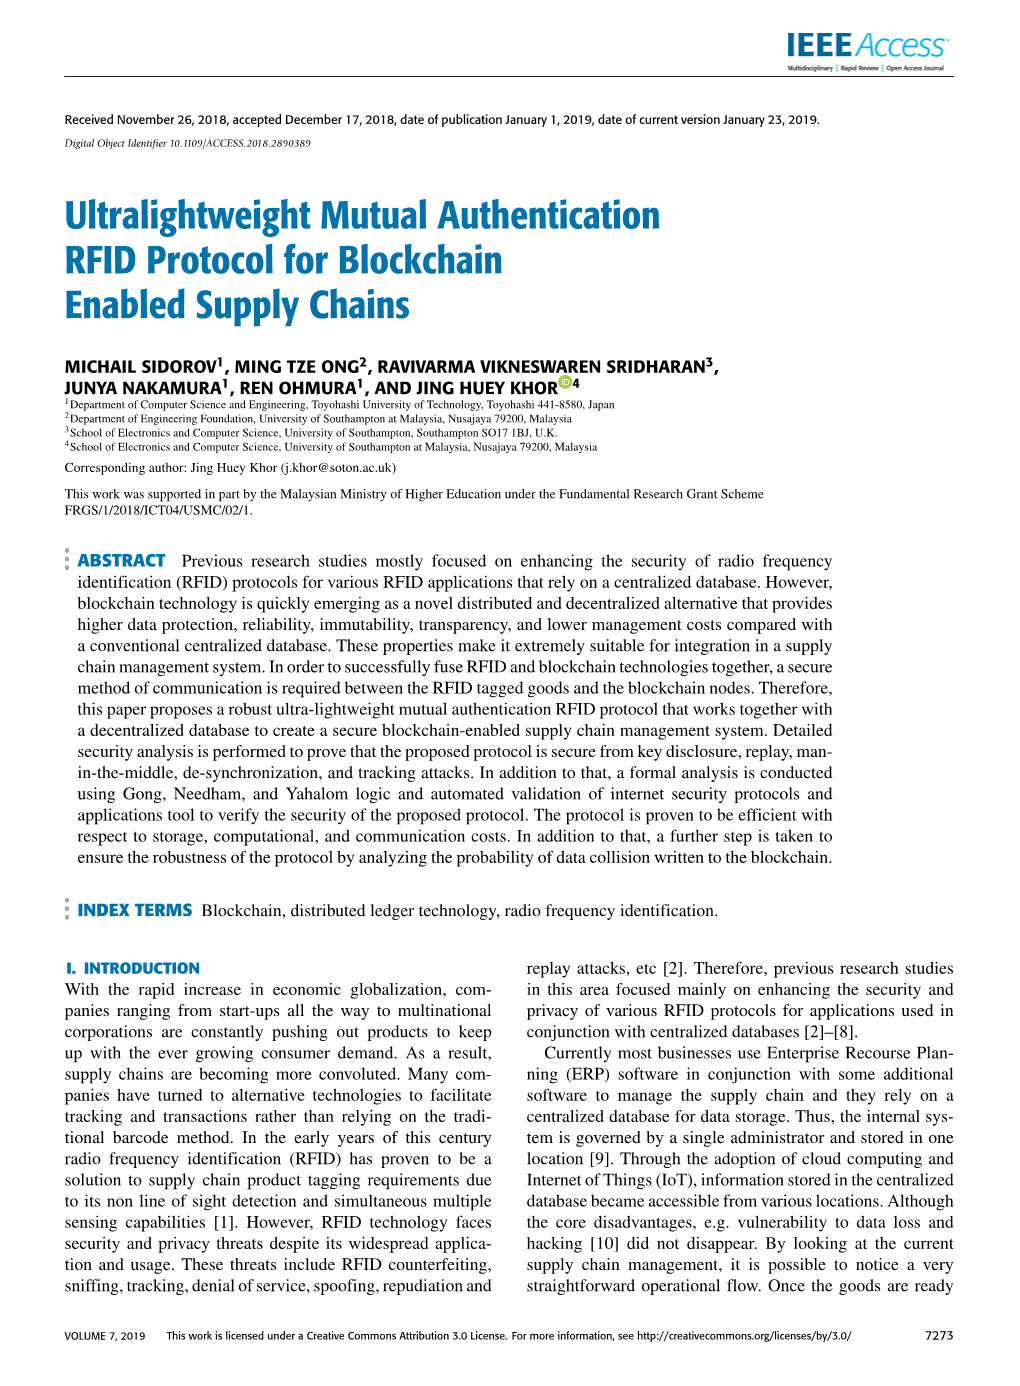 Ultralightweight Mutual Authentication RFID Protocol for Blockchain Enabled Supply Chains